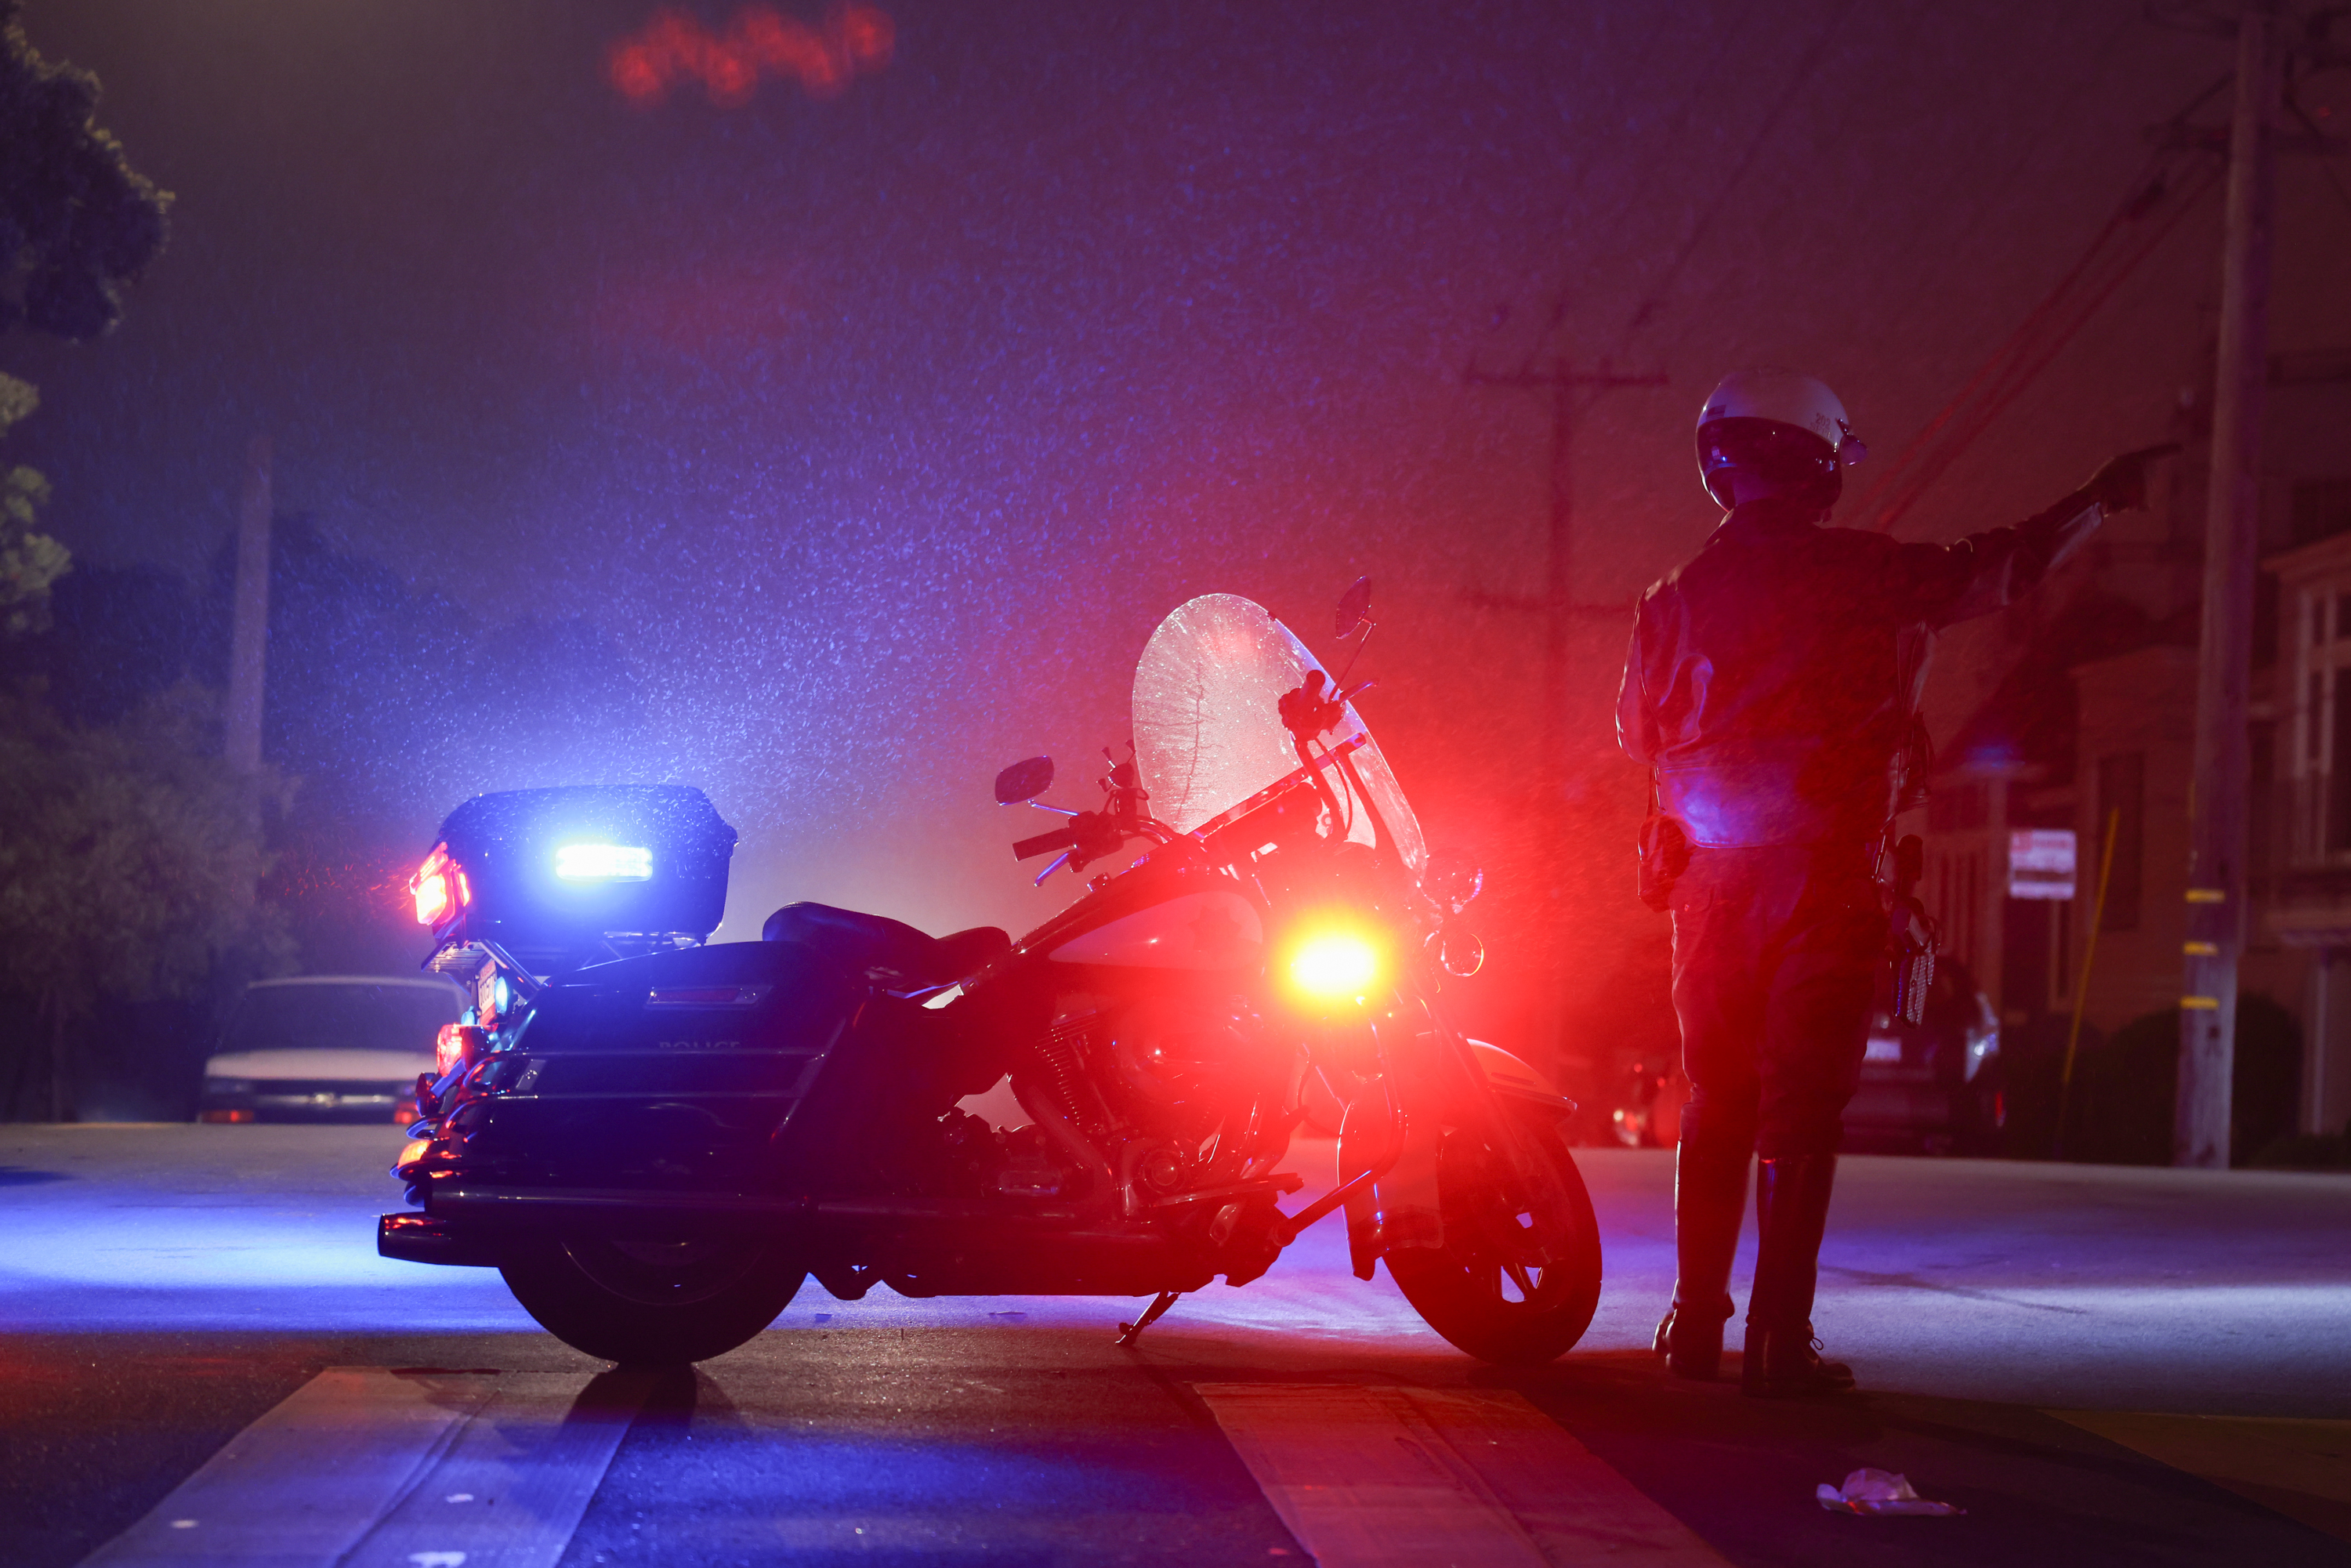 a police officer stands by a police motorcycle with its lights flashing in the dark.